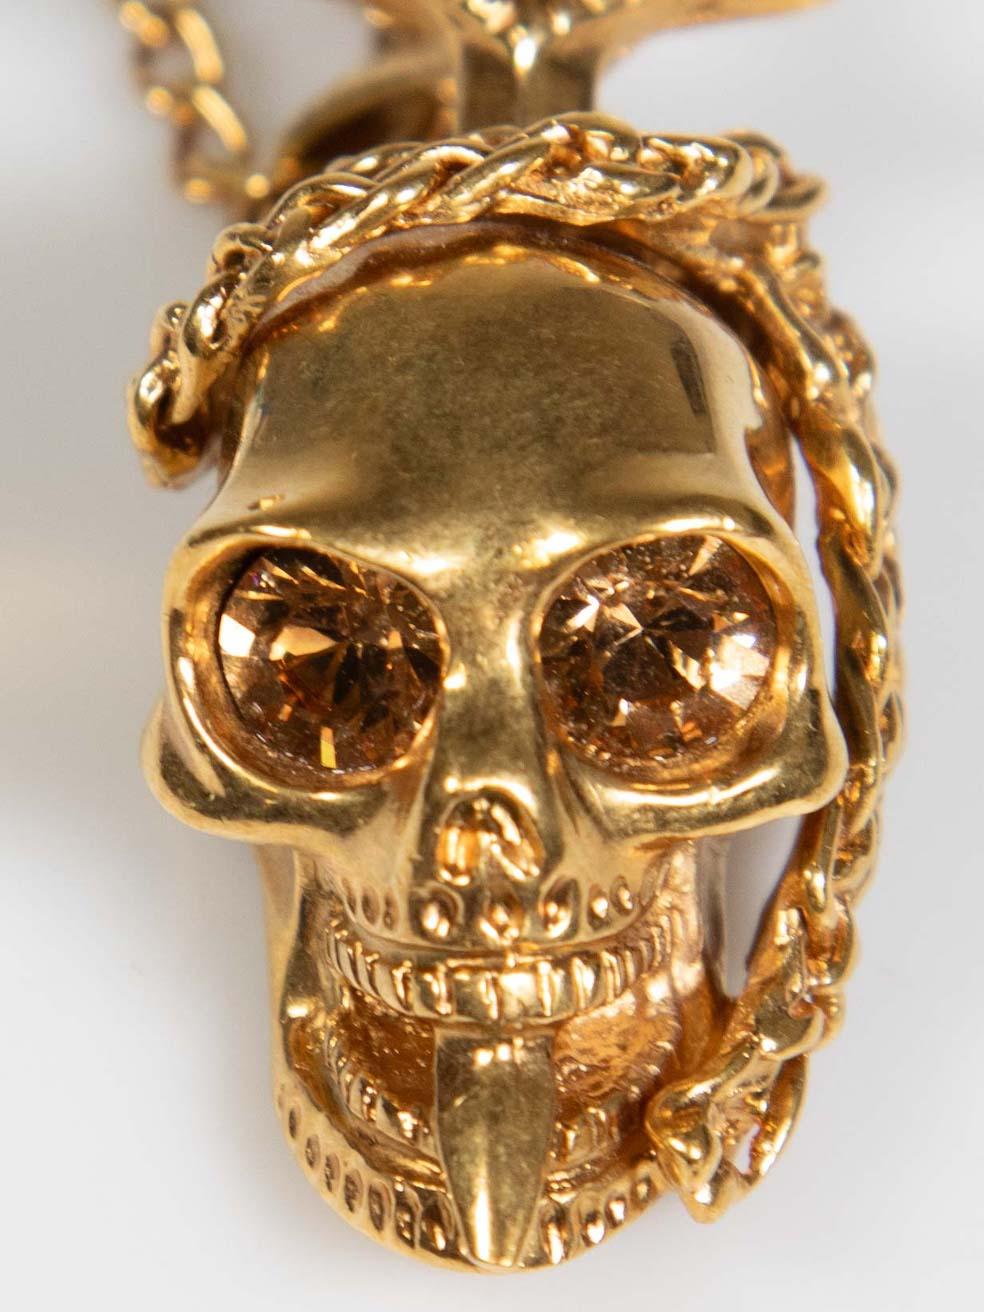 CONDITION is Very good. Minimal wear to necklace is evident. Minimal wear to pendant with light scratches to the metal on this used Alexander McQueen designer resale item.
 
Details
Gold
Metal
Necklace
Skull pendant
Embellished eyes
Slip on- no